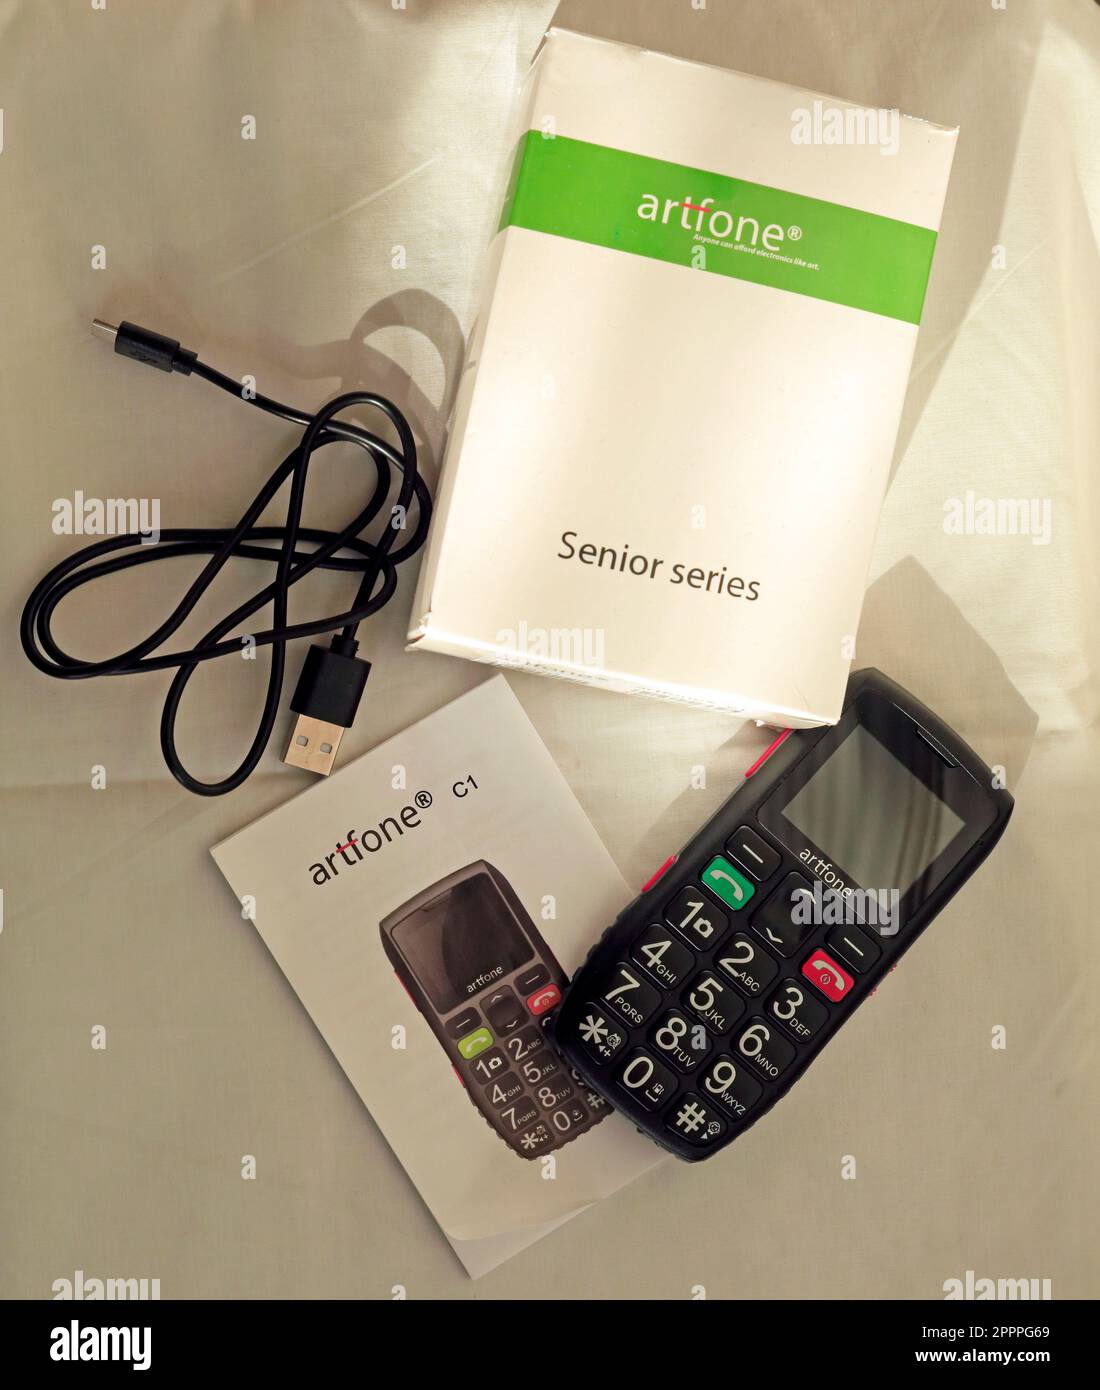 Artfone Senior Series mobile phone with box and charger cable and instruction book Stock Photo